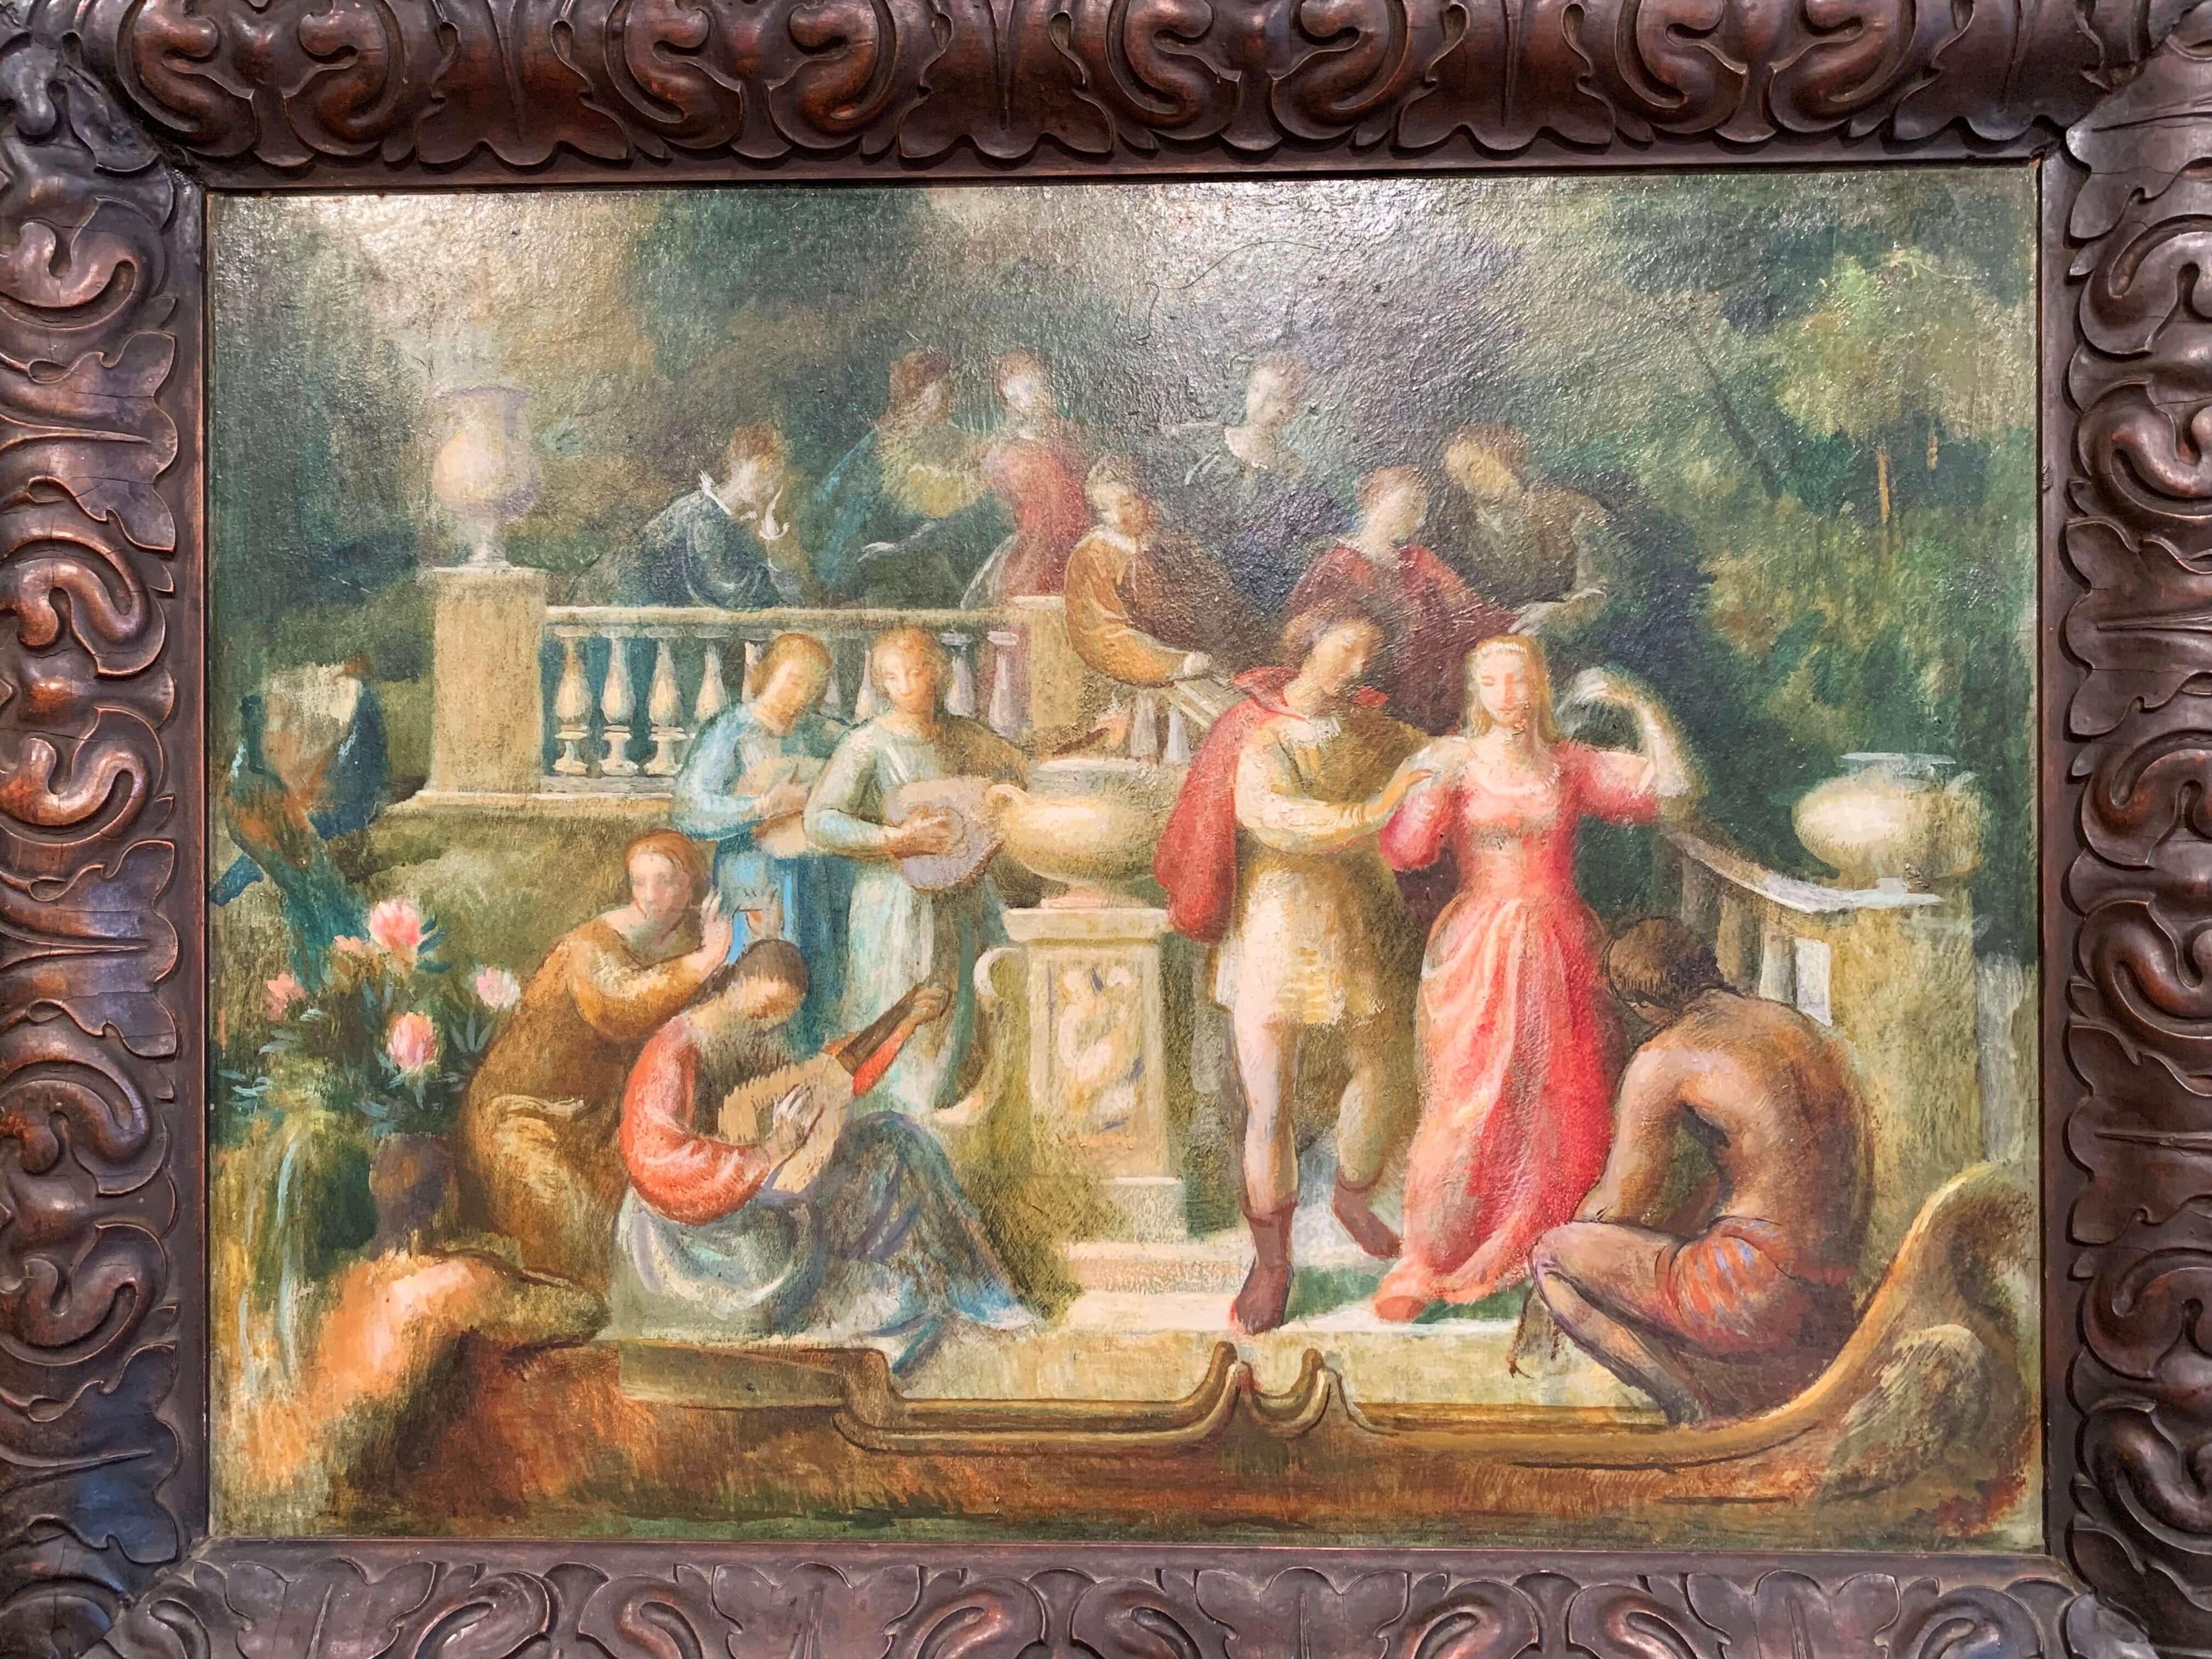 For a pop of vibrant color, look no further than this Spanish painting on board. Painted in Spain circa 1870, the scene depicts a serenade, in which a young man proposes marriage to a young beauty. The illustrated composition has a bright, cheerful